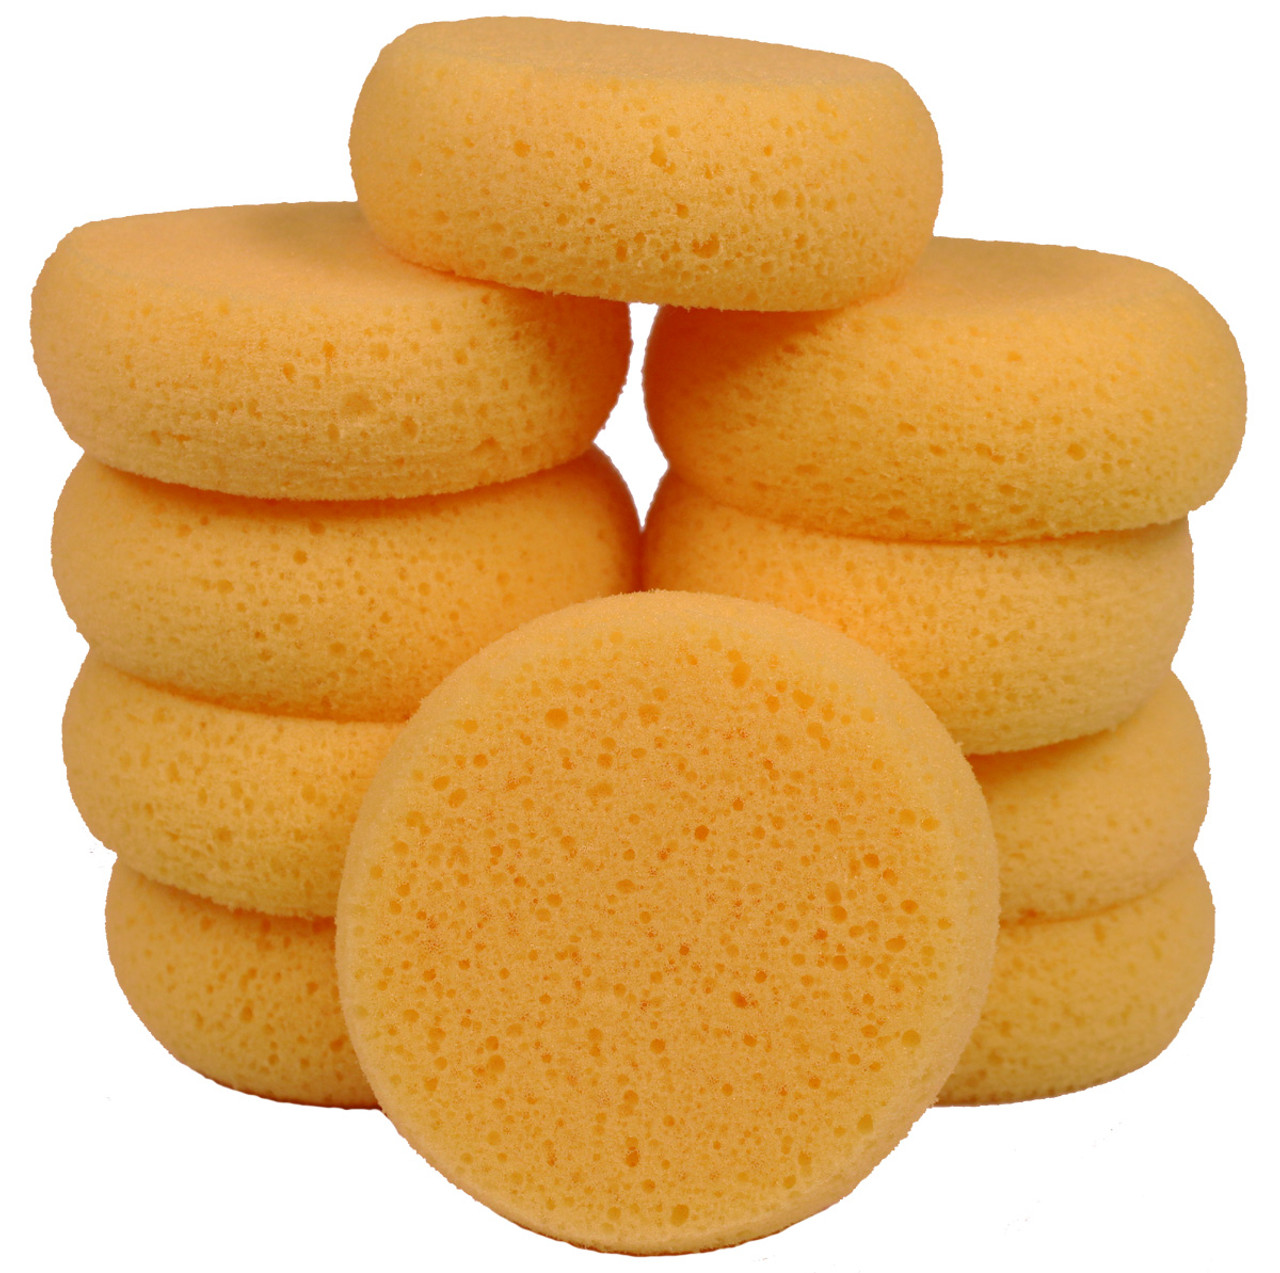 3-1/2 Inch Round Synthetic Silk Sponges for Painting, Crafts, Ceramics,  Household Use & More! Pack of 10 Sponges